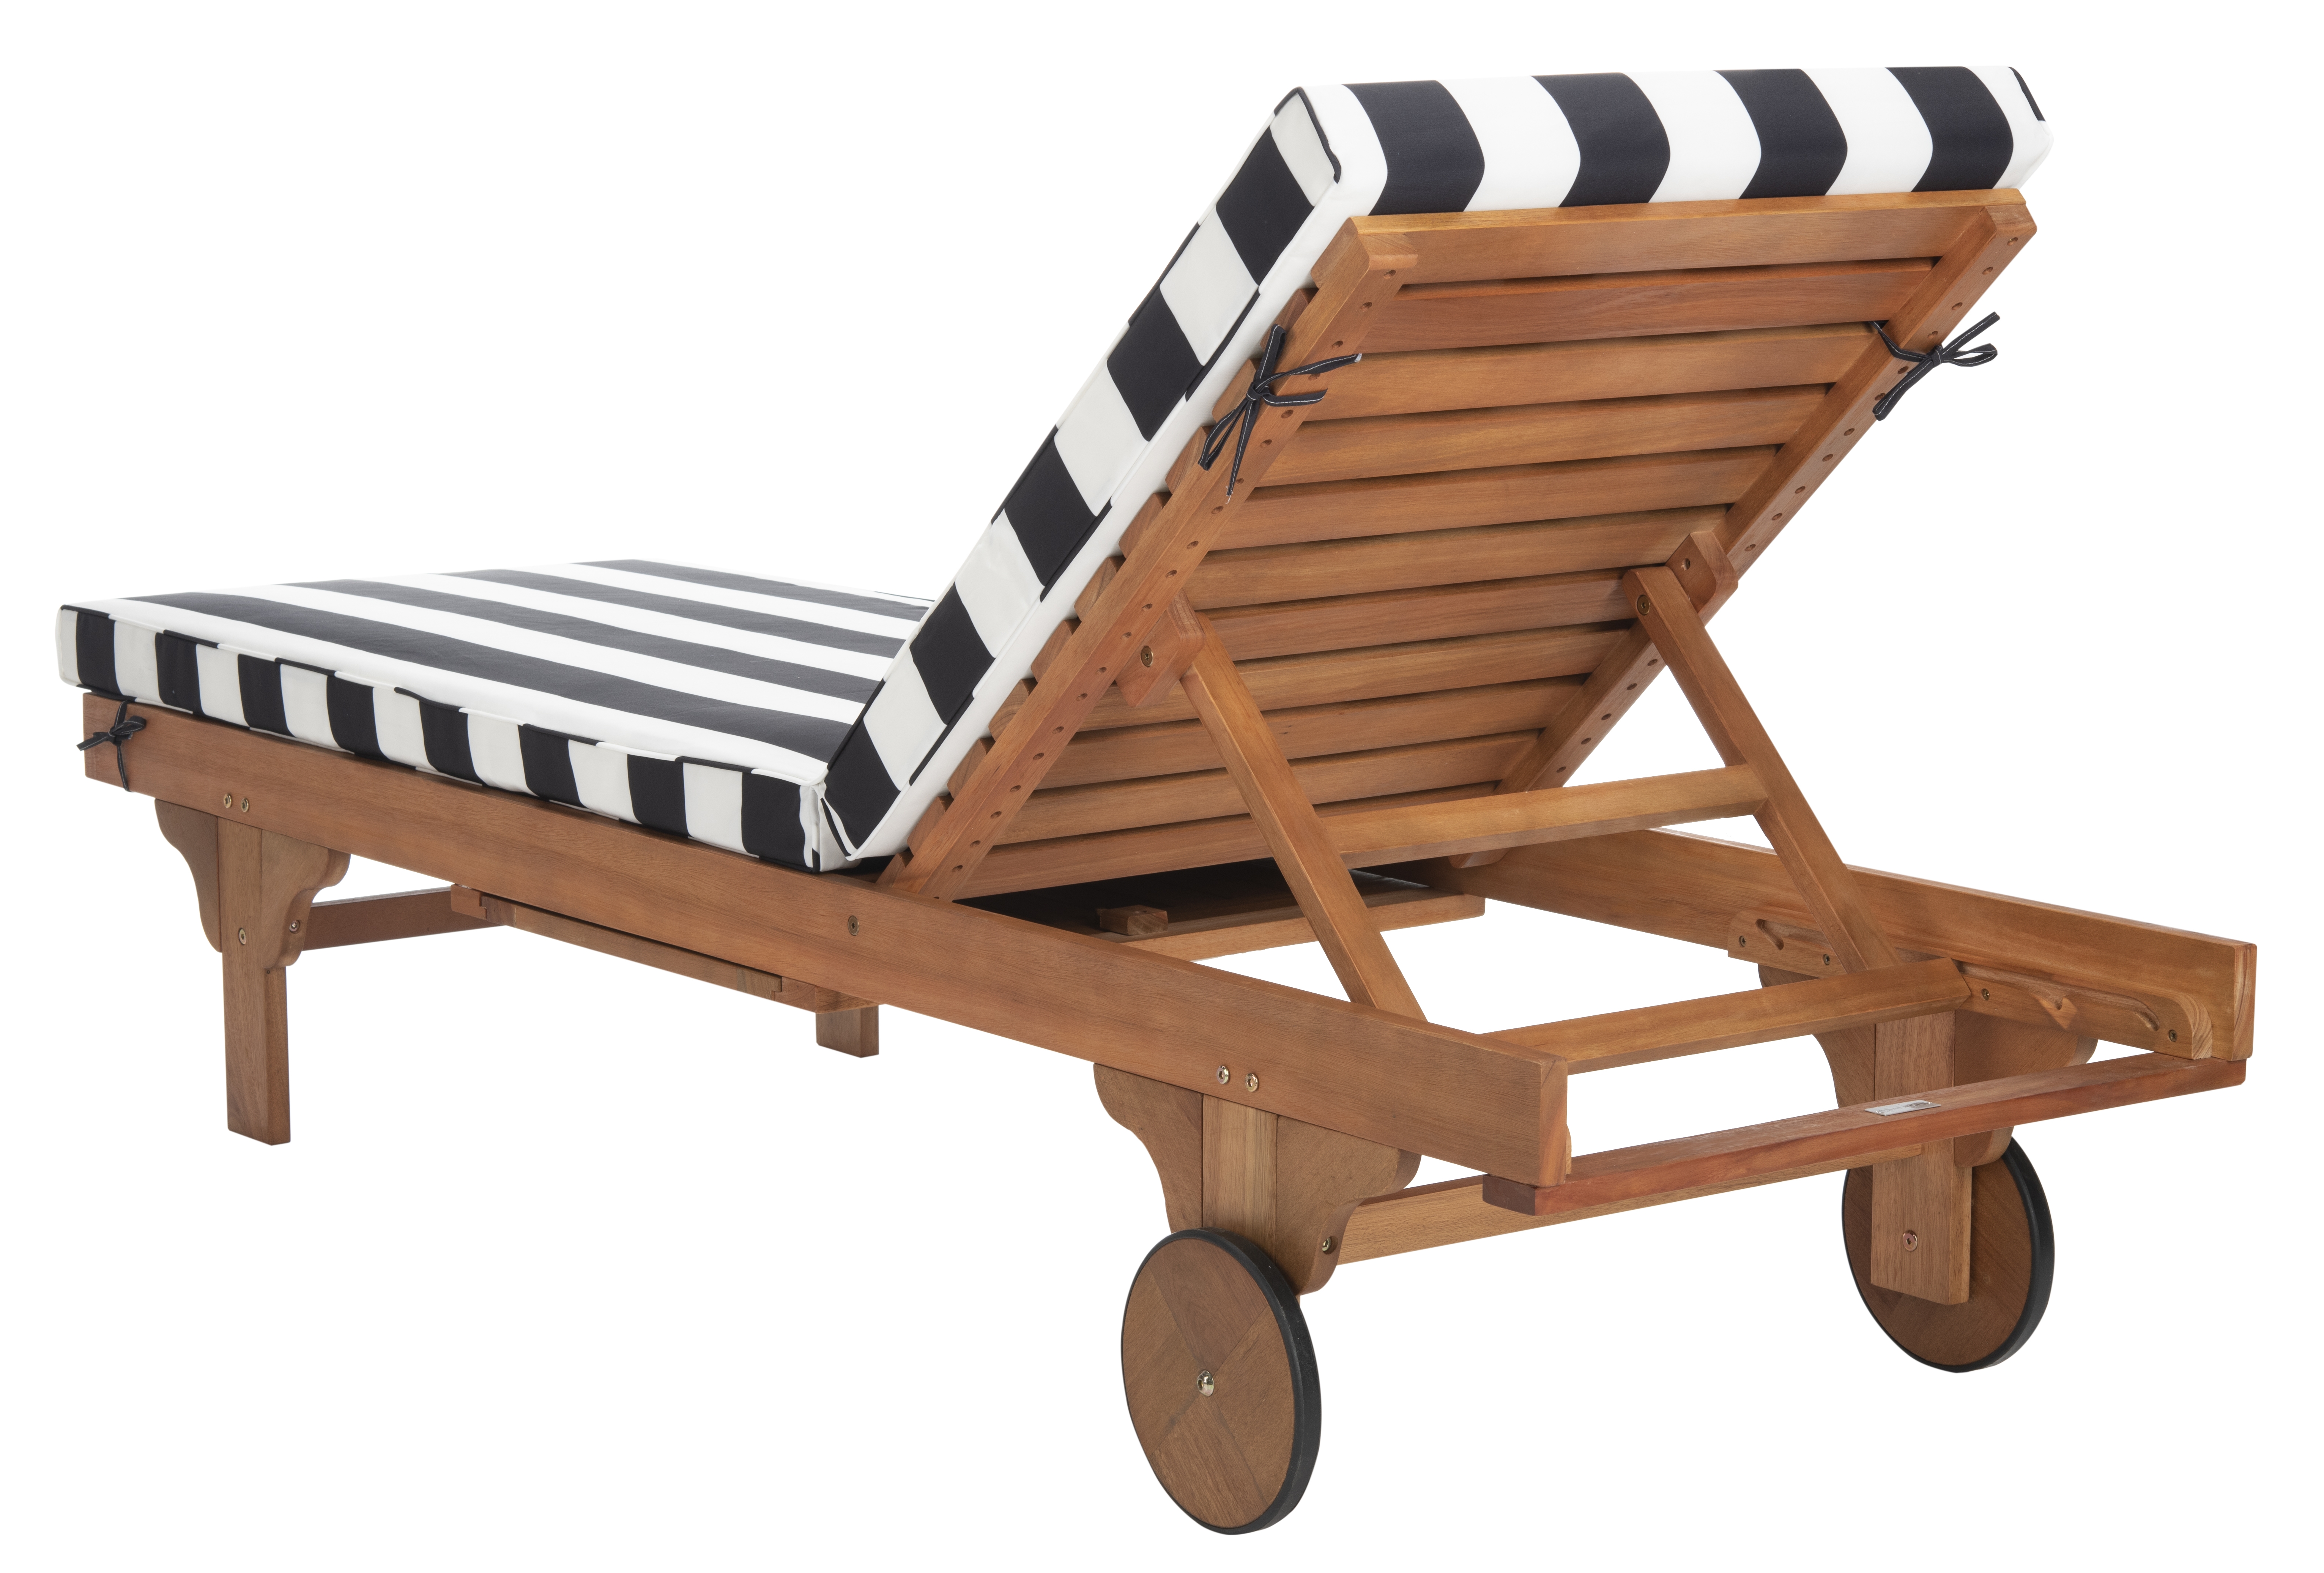 Newport Chaise Lounge Chair With Side Table, Black & White - Image 2